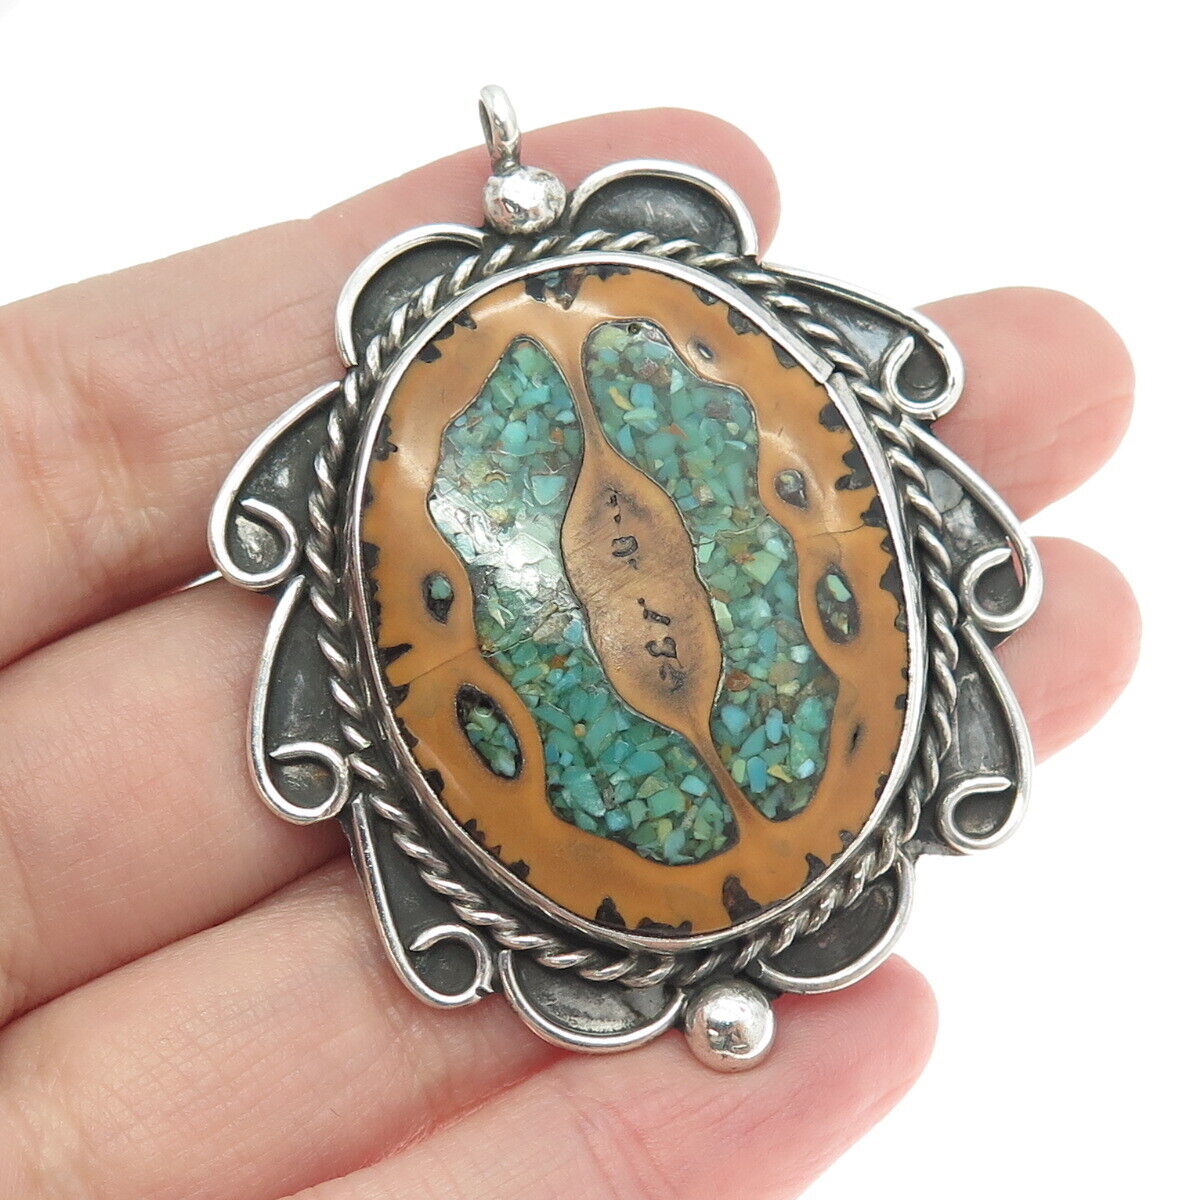 Old Pawn 925 Sterling Silver Vintage Southwestern Turquoise Inlay Tribal Pendant